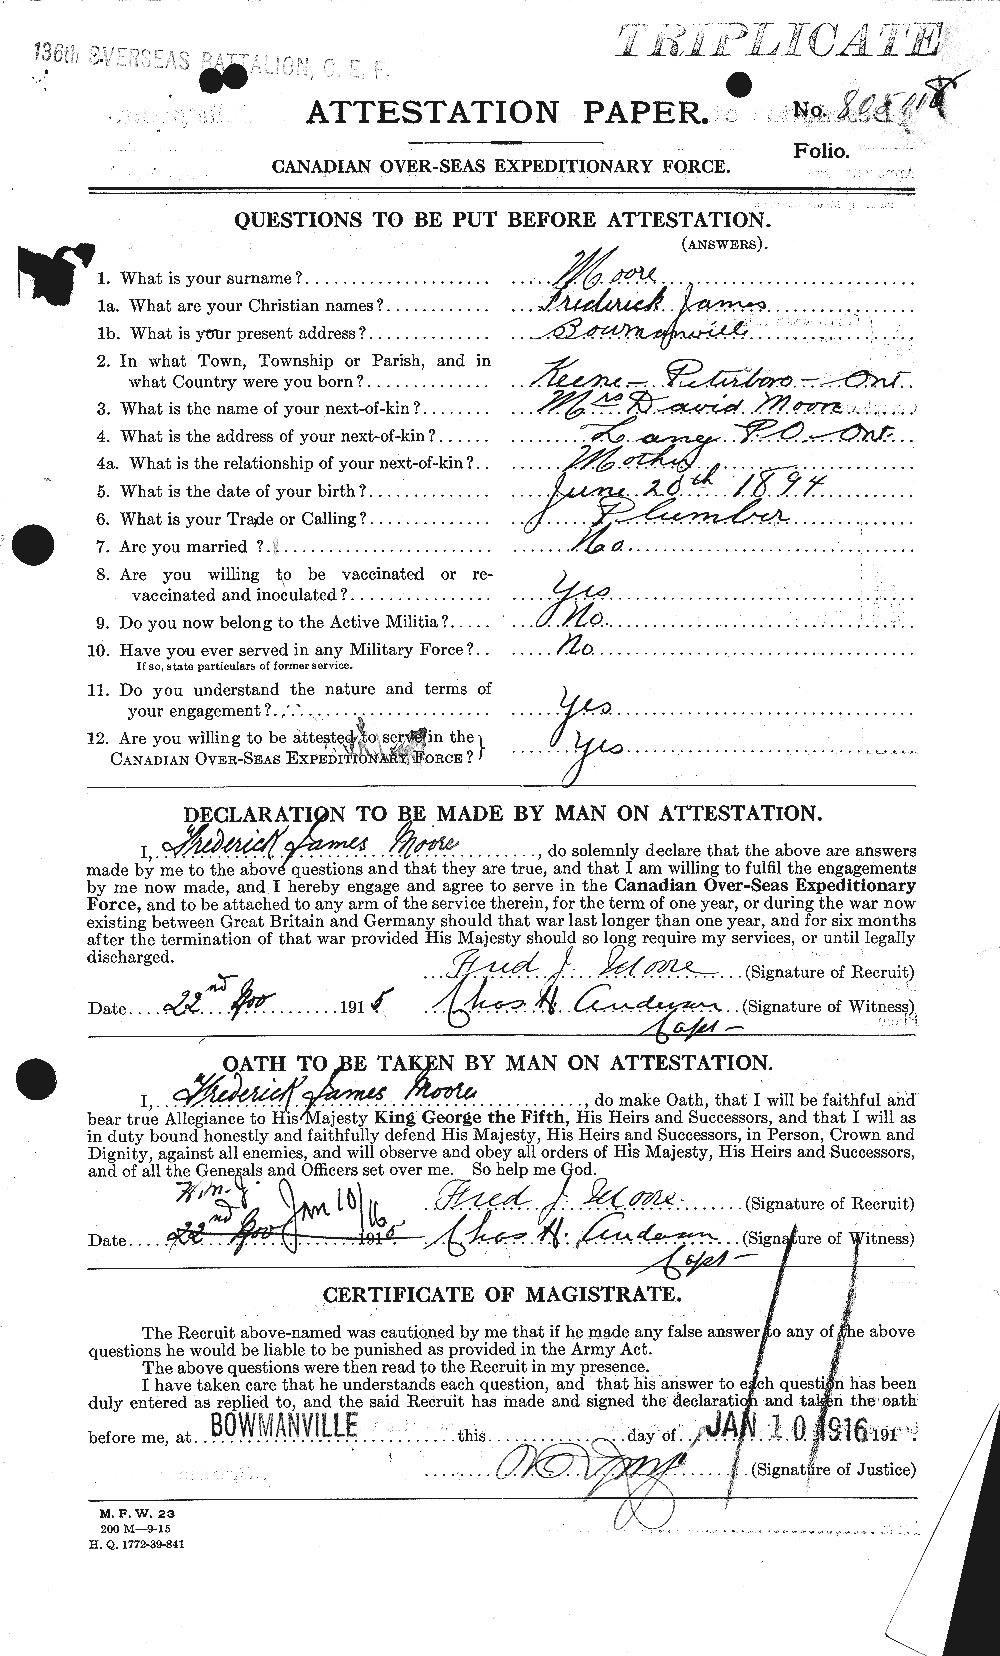 Personnel Records of the First World War - CEF 506750a